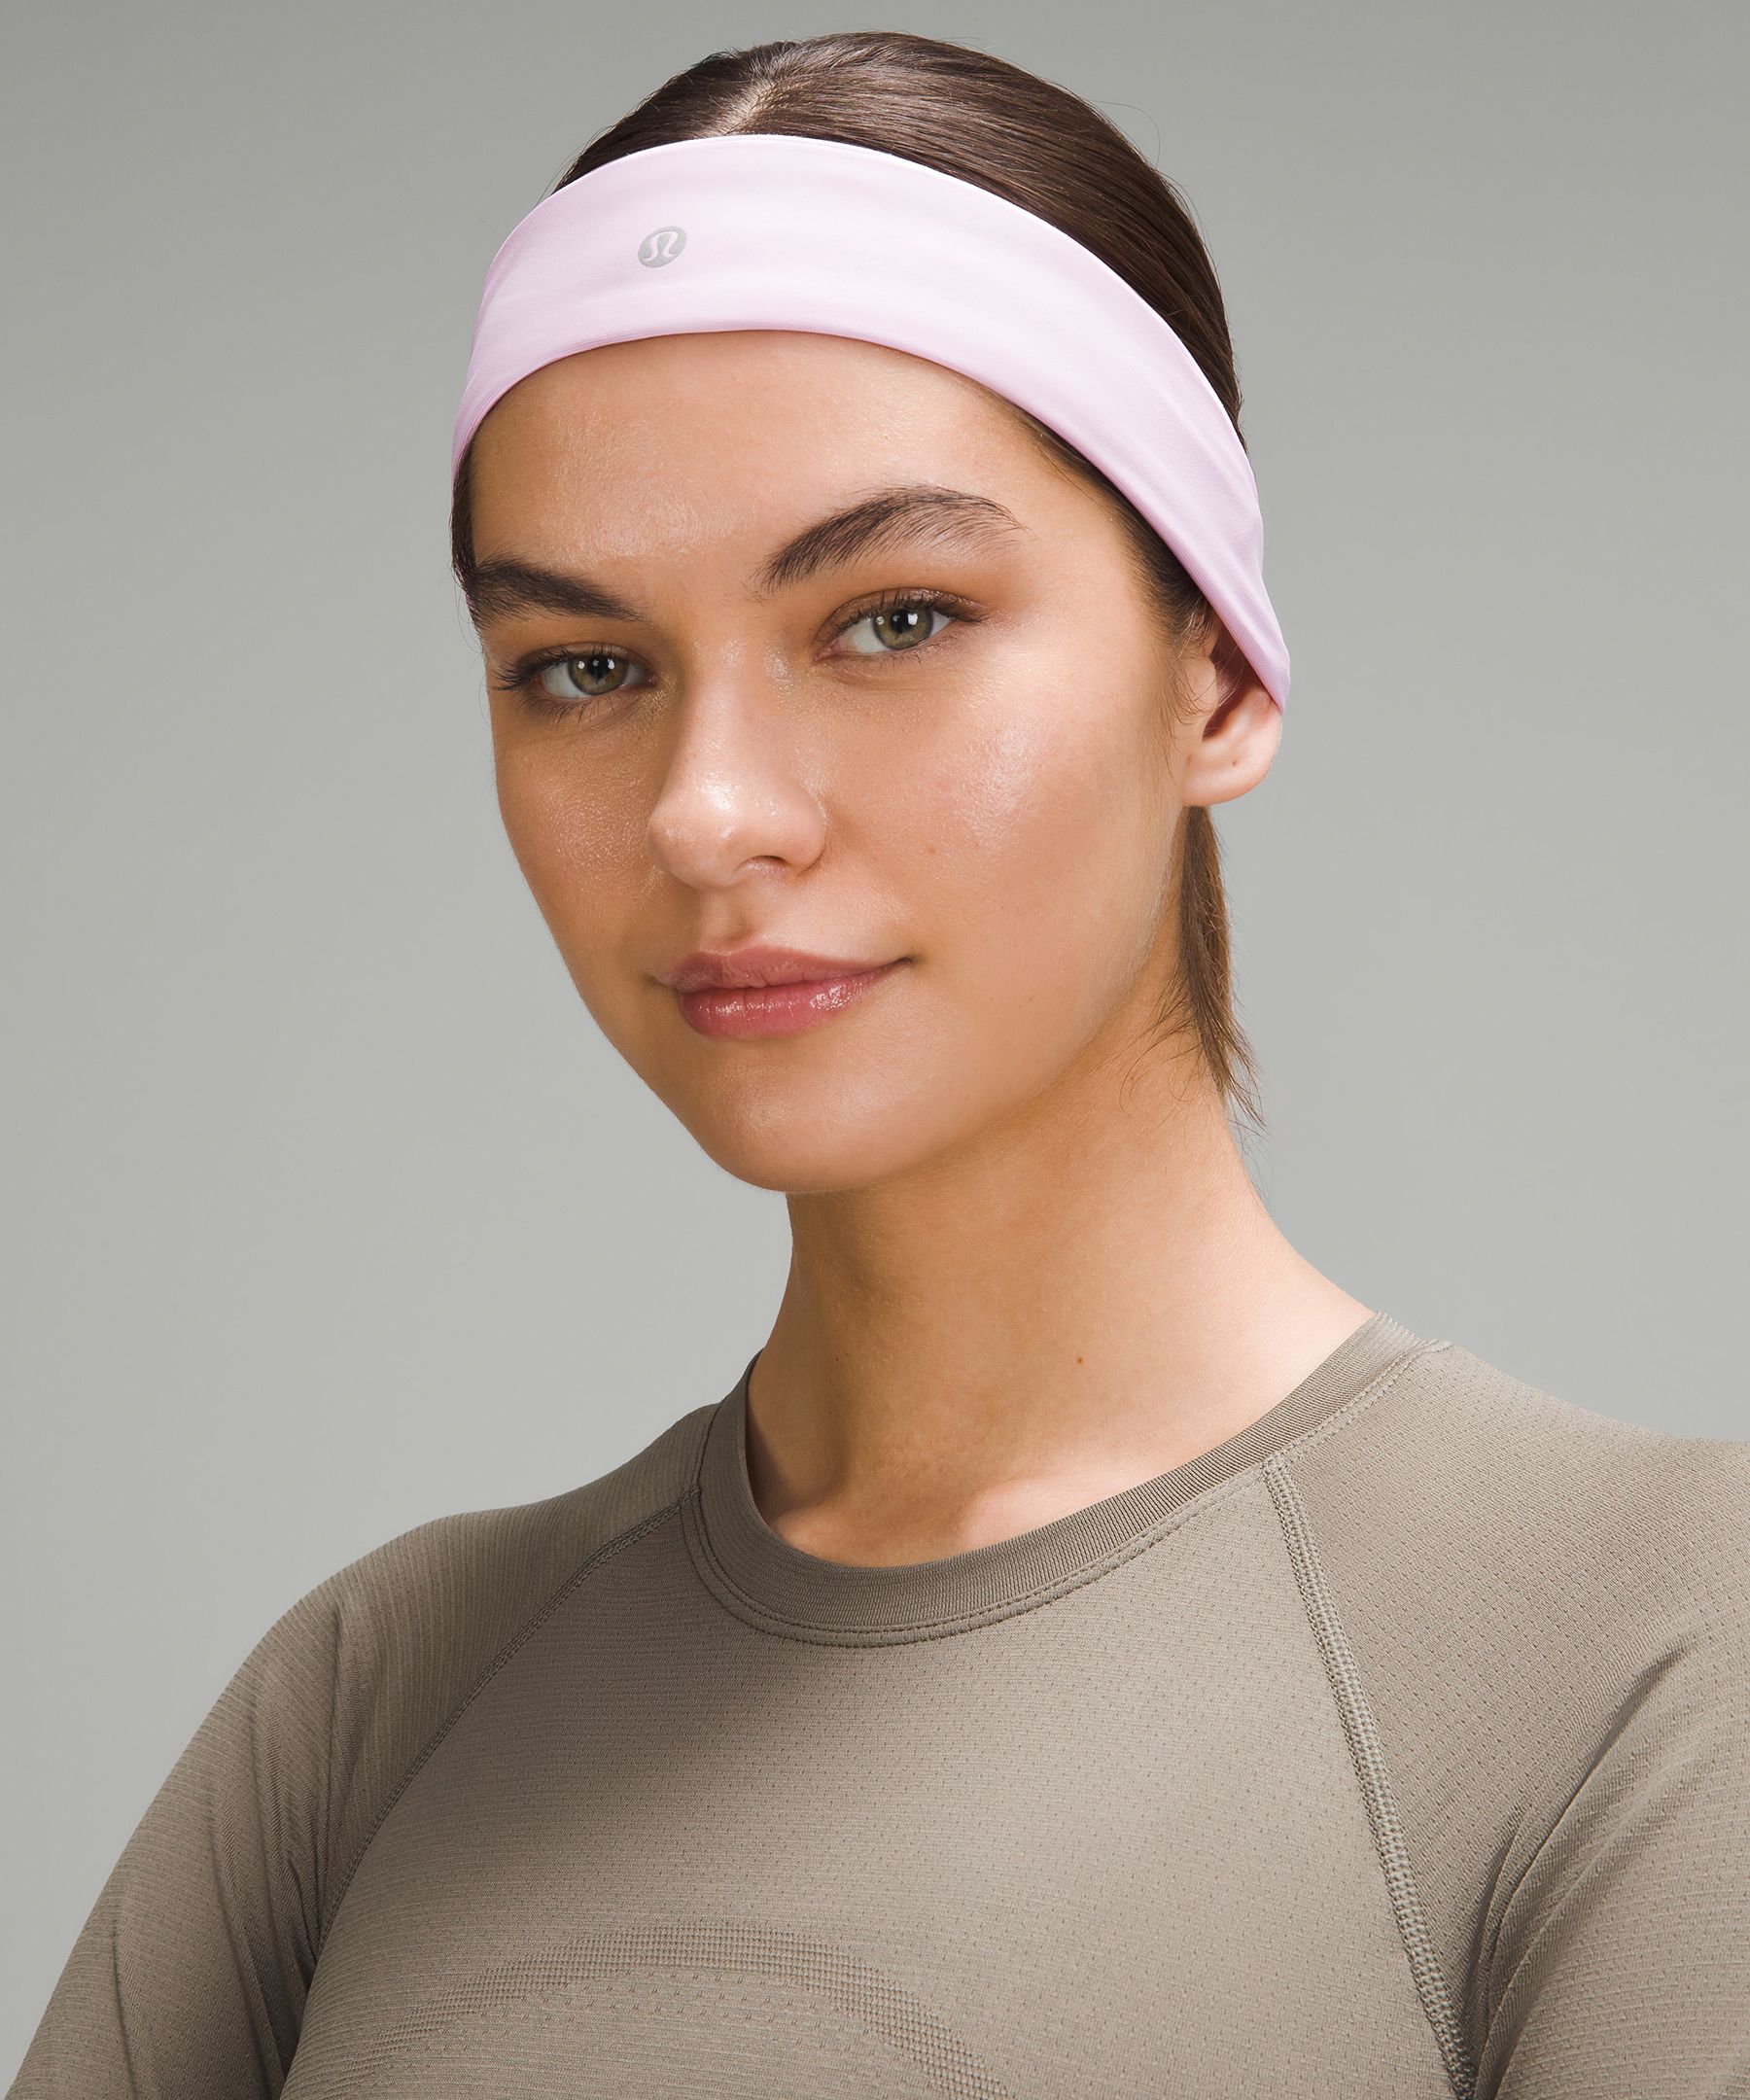 Lululemon Headbands in All Colors - $12 Each or $130 for All